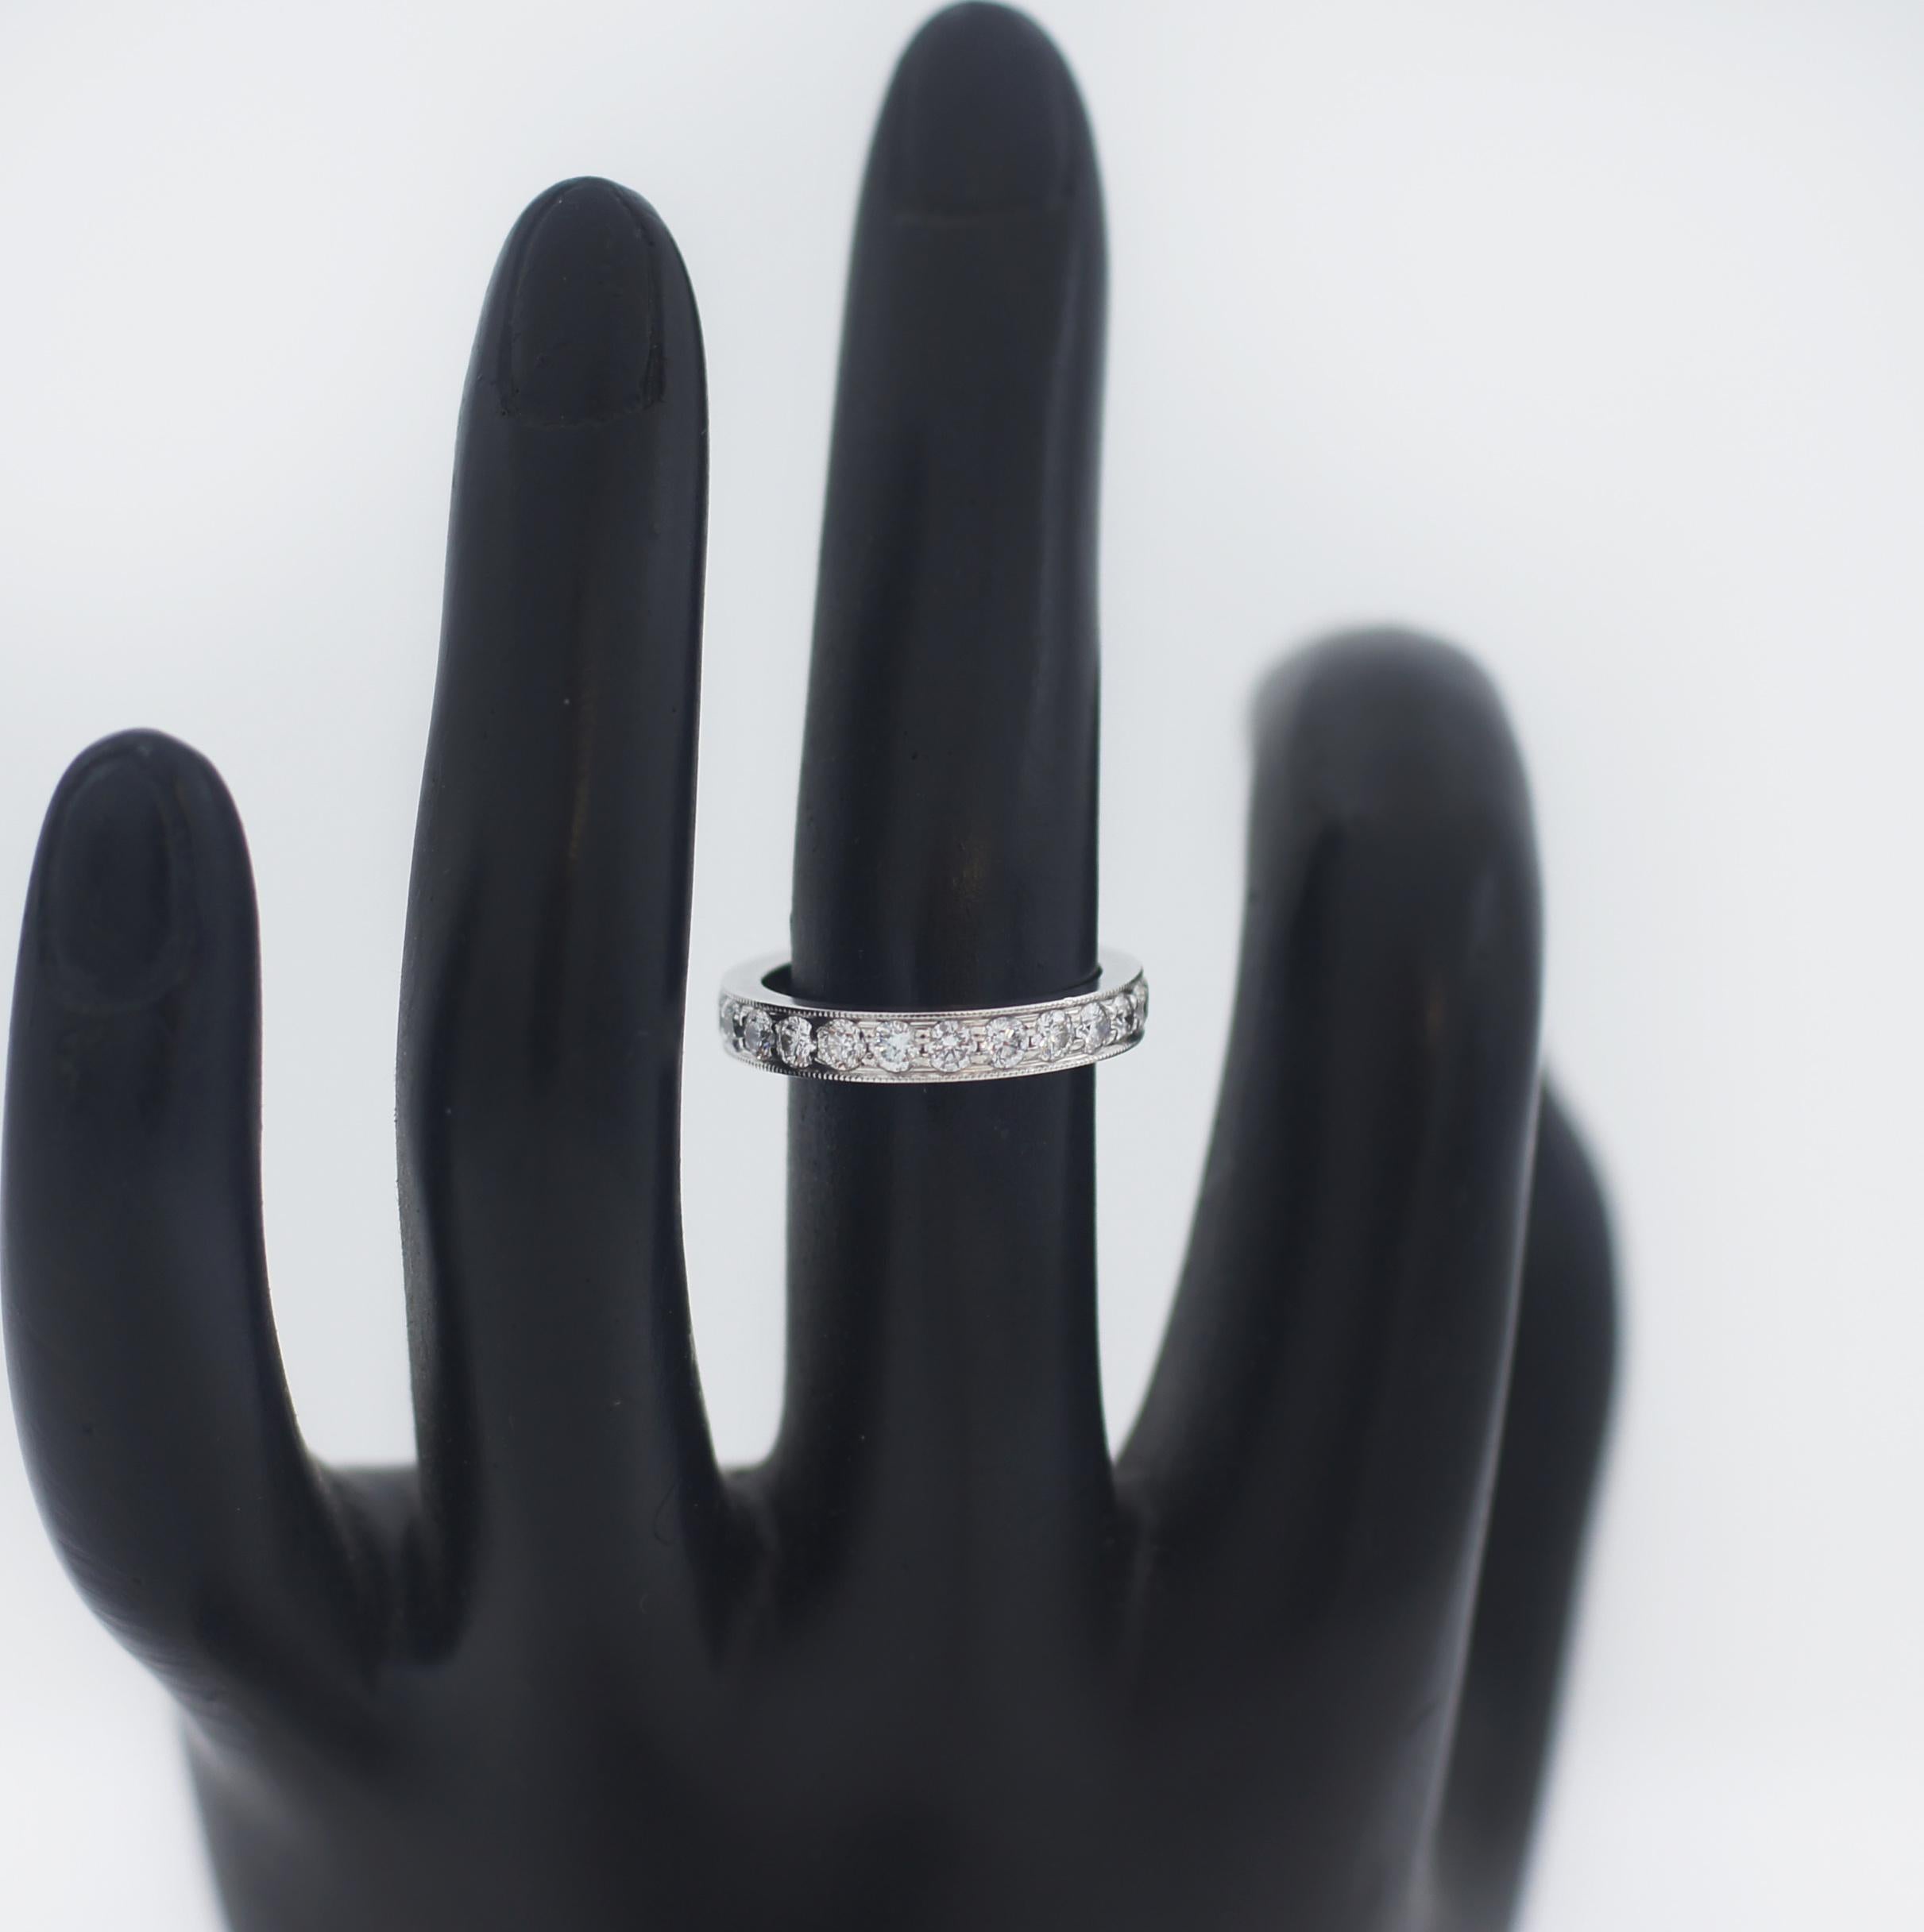 The Tiffany Together collection represents how our most important commitments are uniquely ours and only we can define them. Textured milgrain edges in platinum with diamonds give this ring a modern feel. Pair it with other styles for a bold